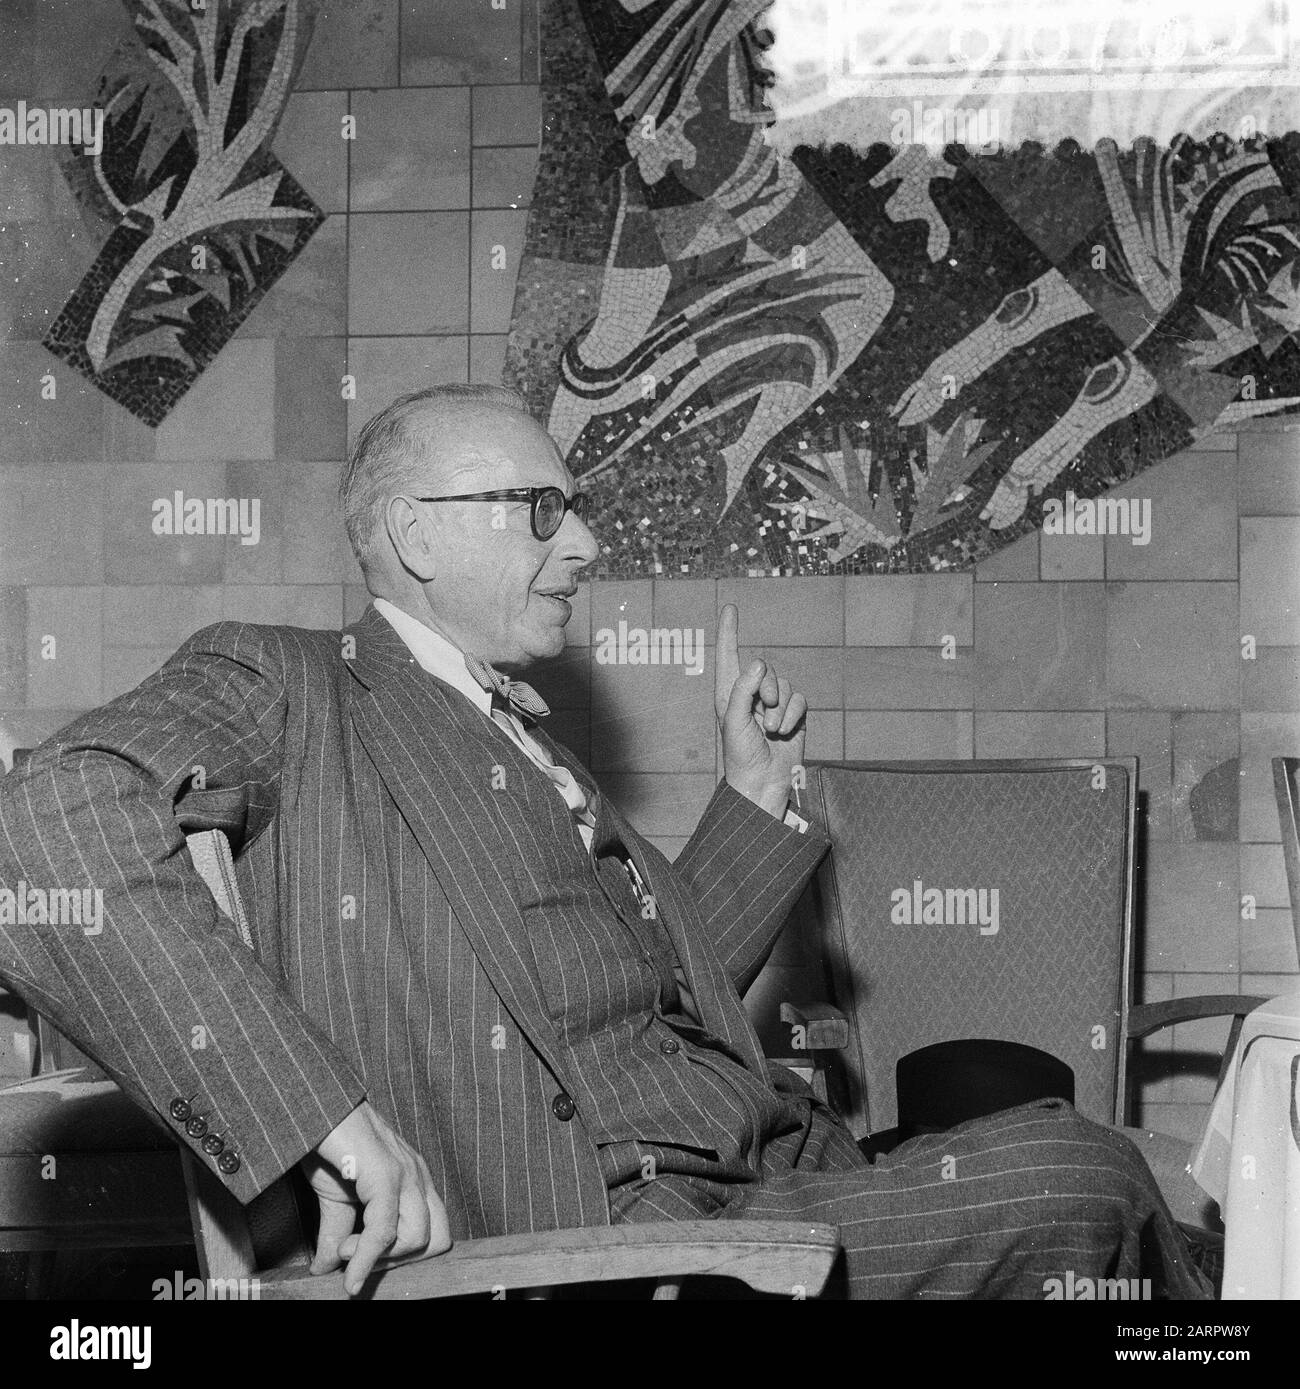 George Szell, conductor, and Clevelandorkest at Schiphol Date: June 14, 1957 Location: Noord-Holland, Schiphol Keywords: conductors Personal name: George Szell Stock Photo